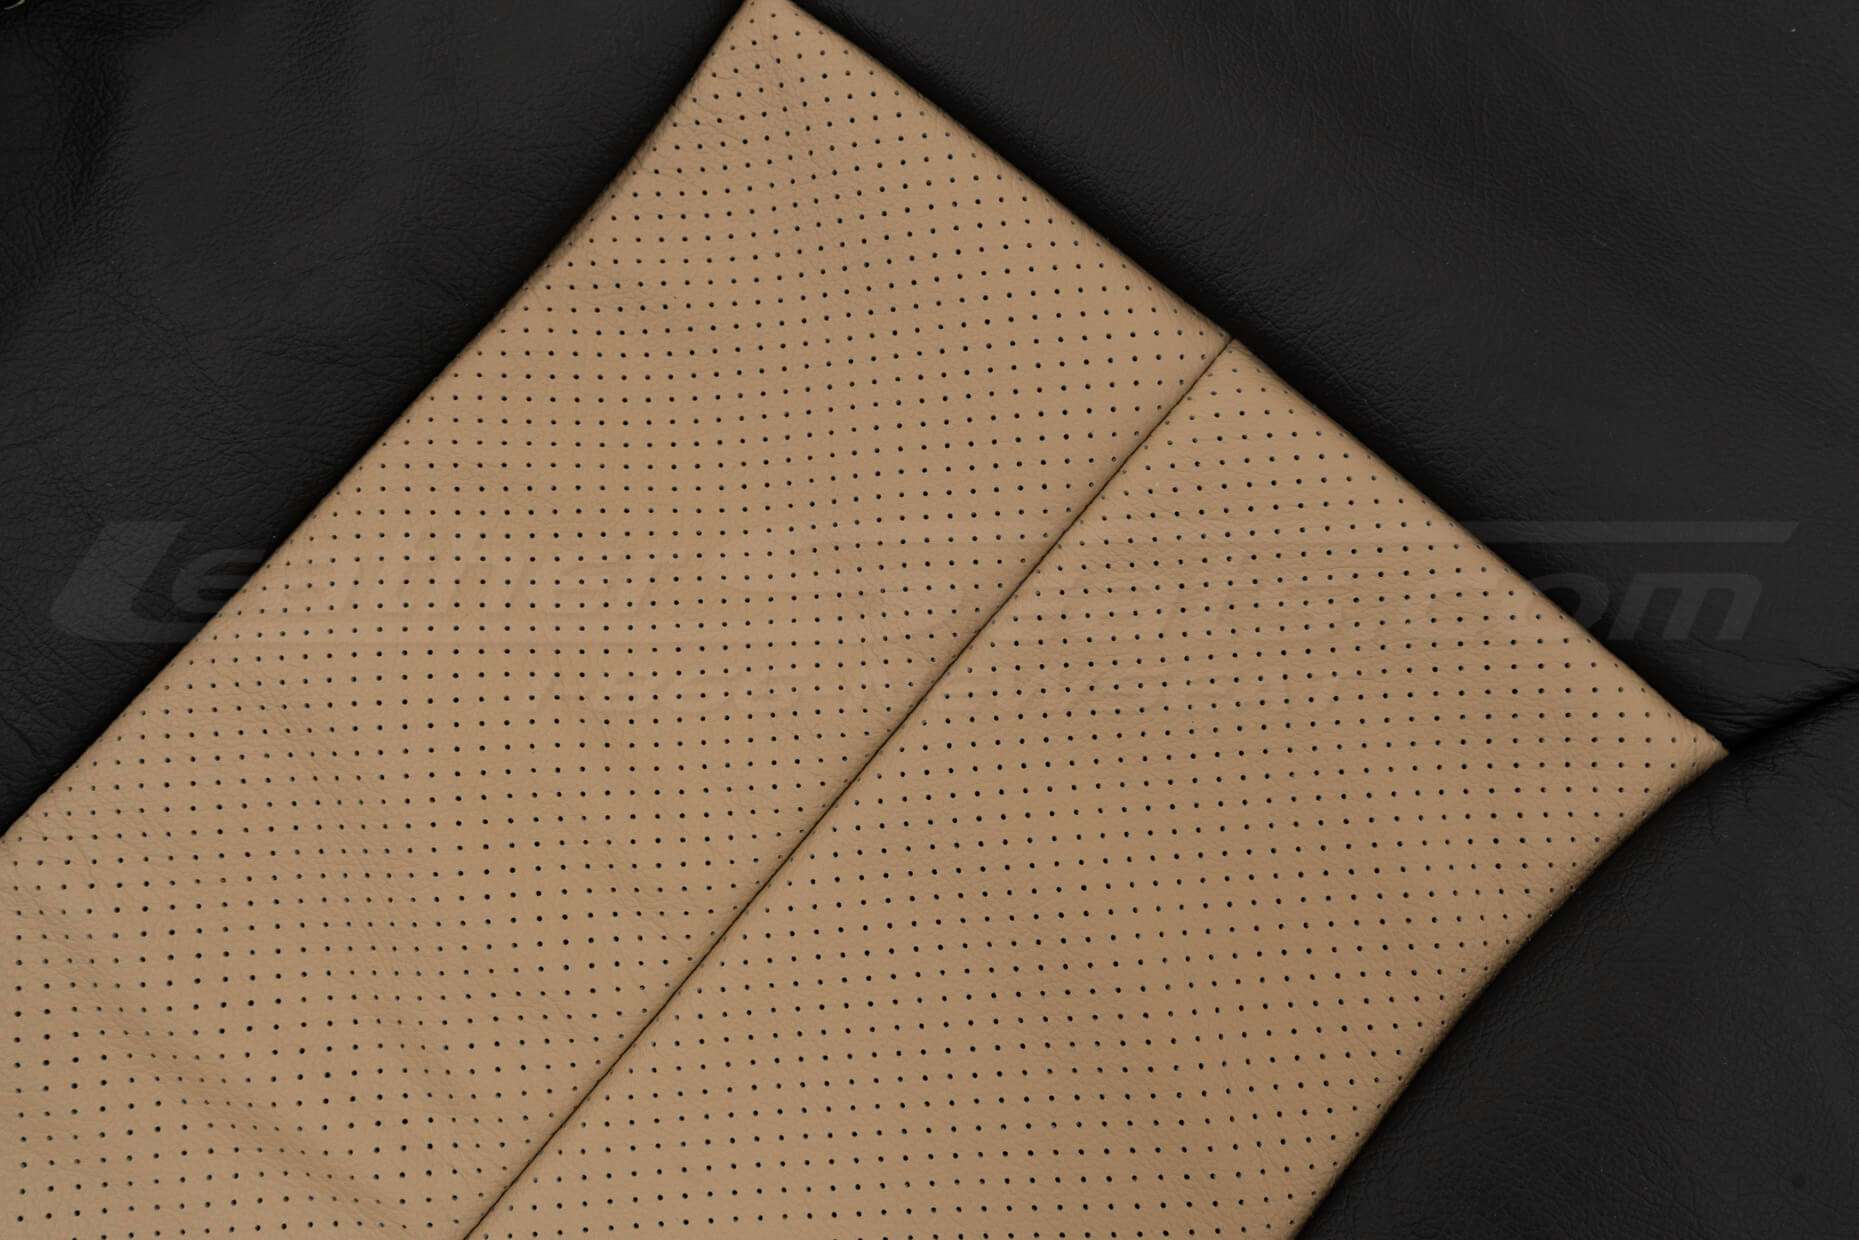 Perforated Combo close-up & leather texture